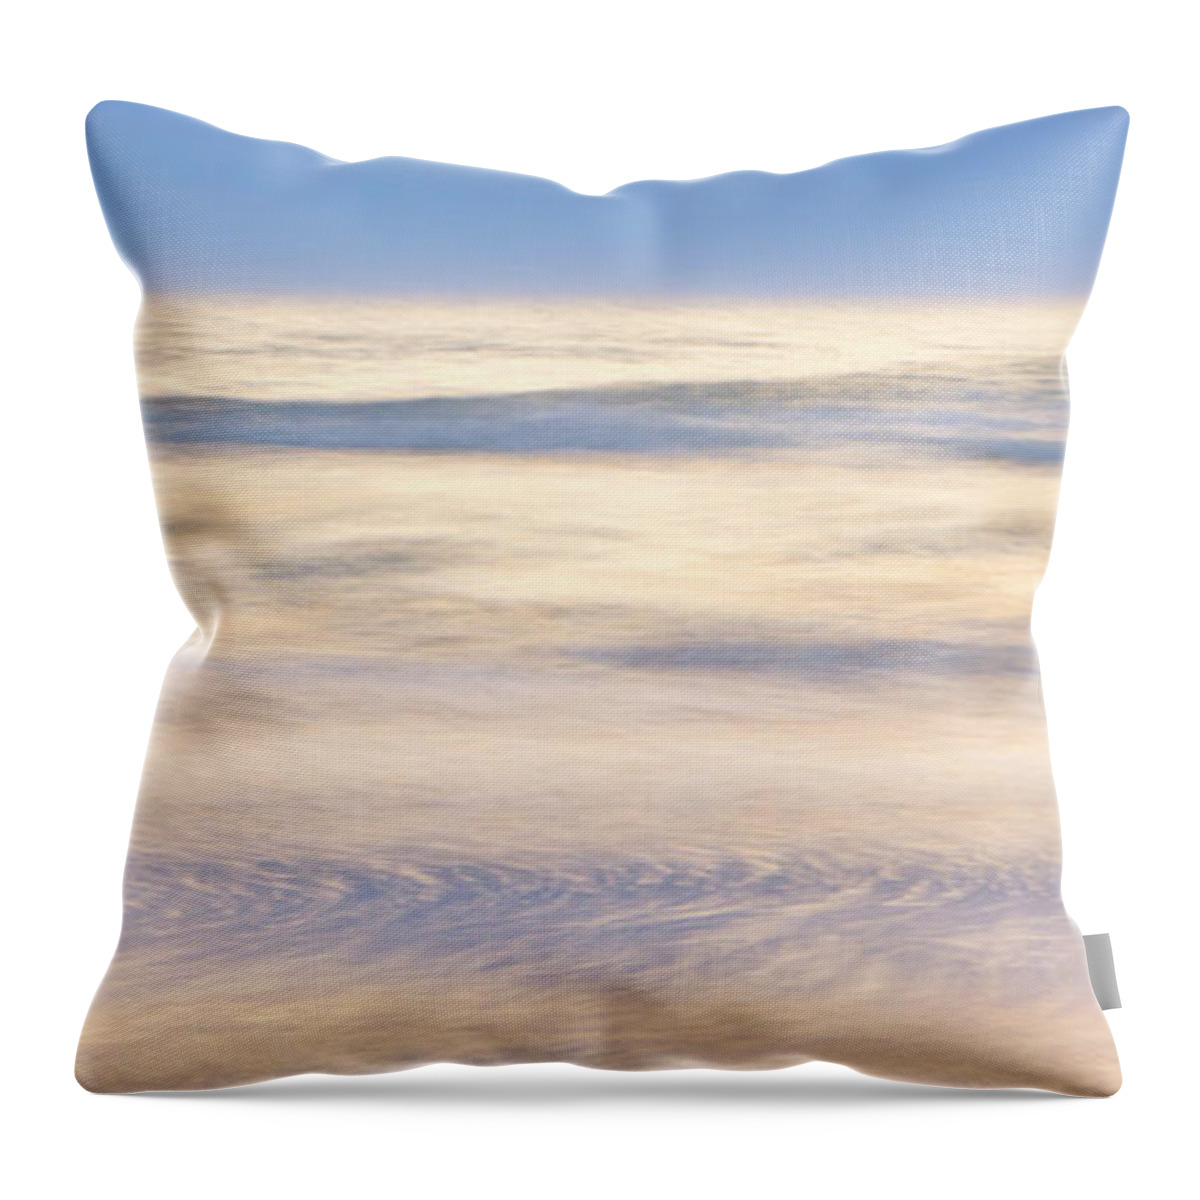 00345483 Throw Pillow featuring the photograph Cumulus Clouds Reflecting In Calm Sea by Yva Momatiuk John Eastcott